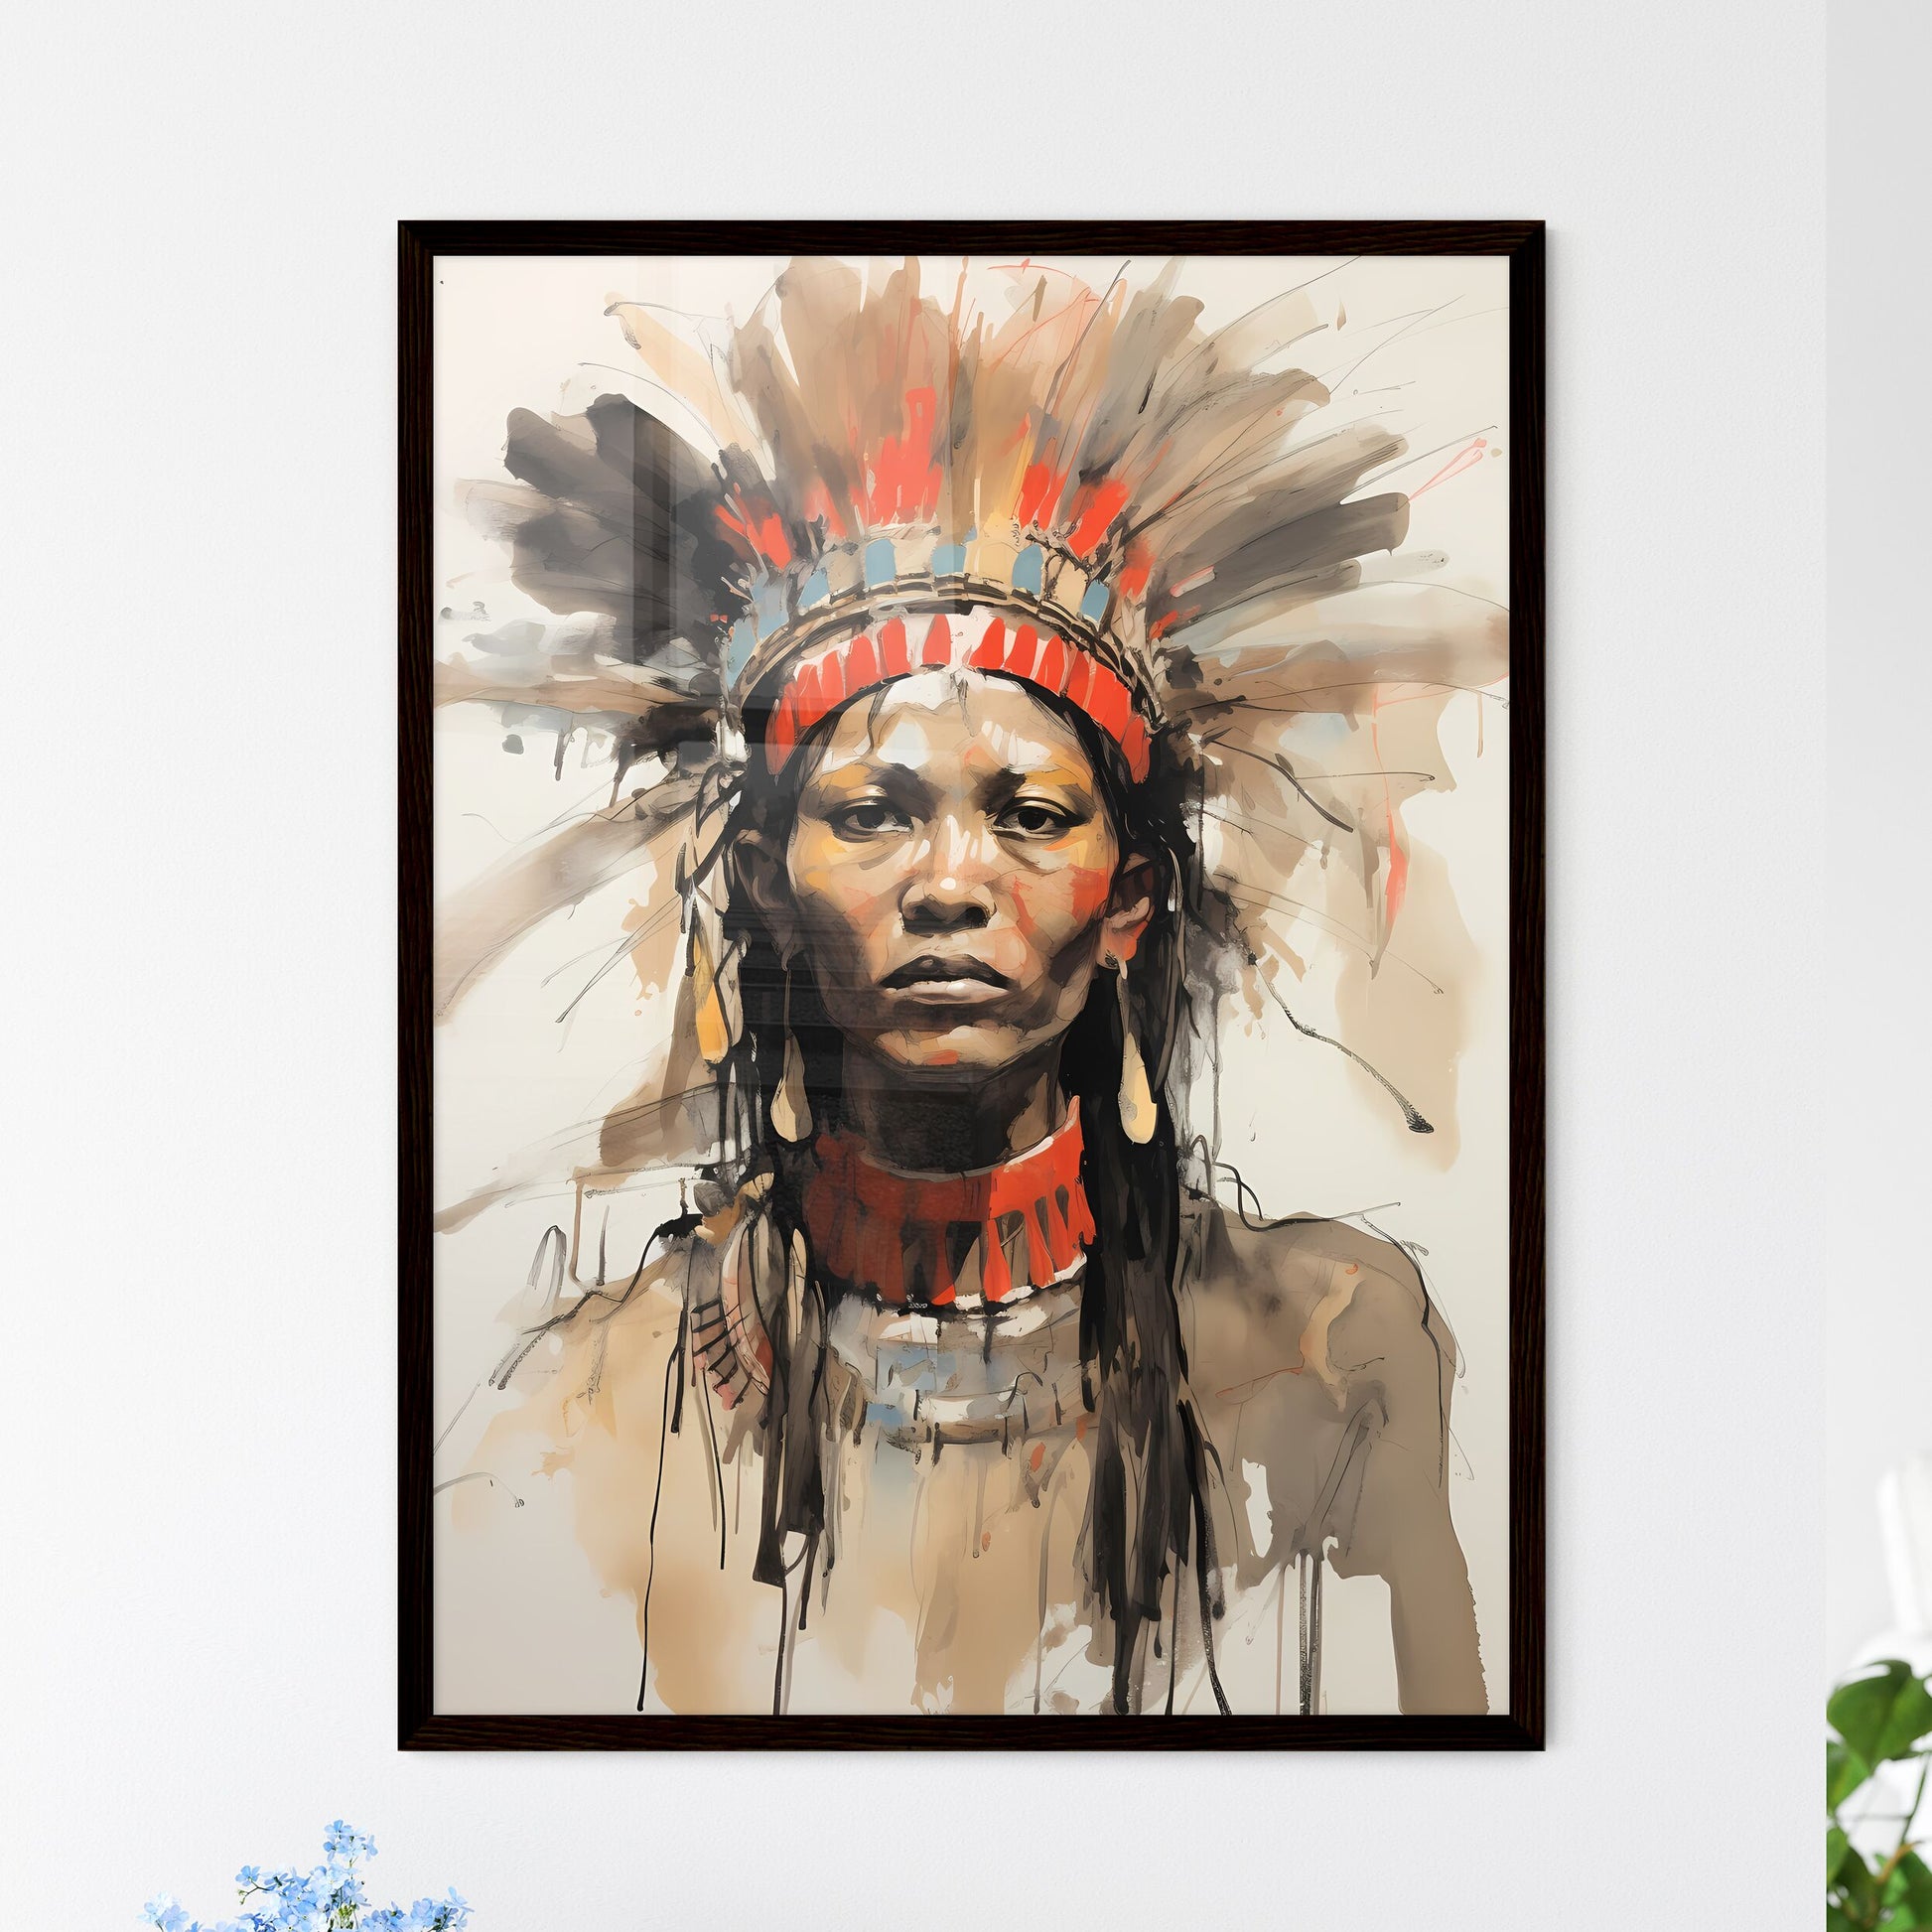 A Poster of indigenous portrait - A Painting Of A Woman Wearing A Headdress Default Title